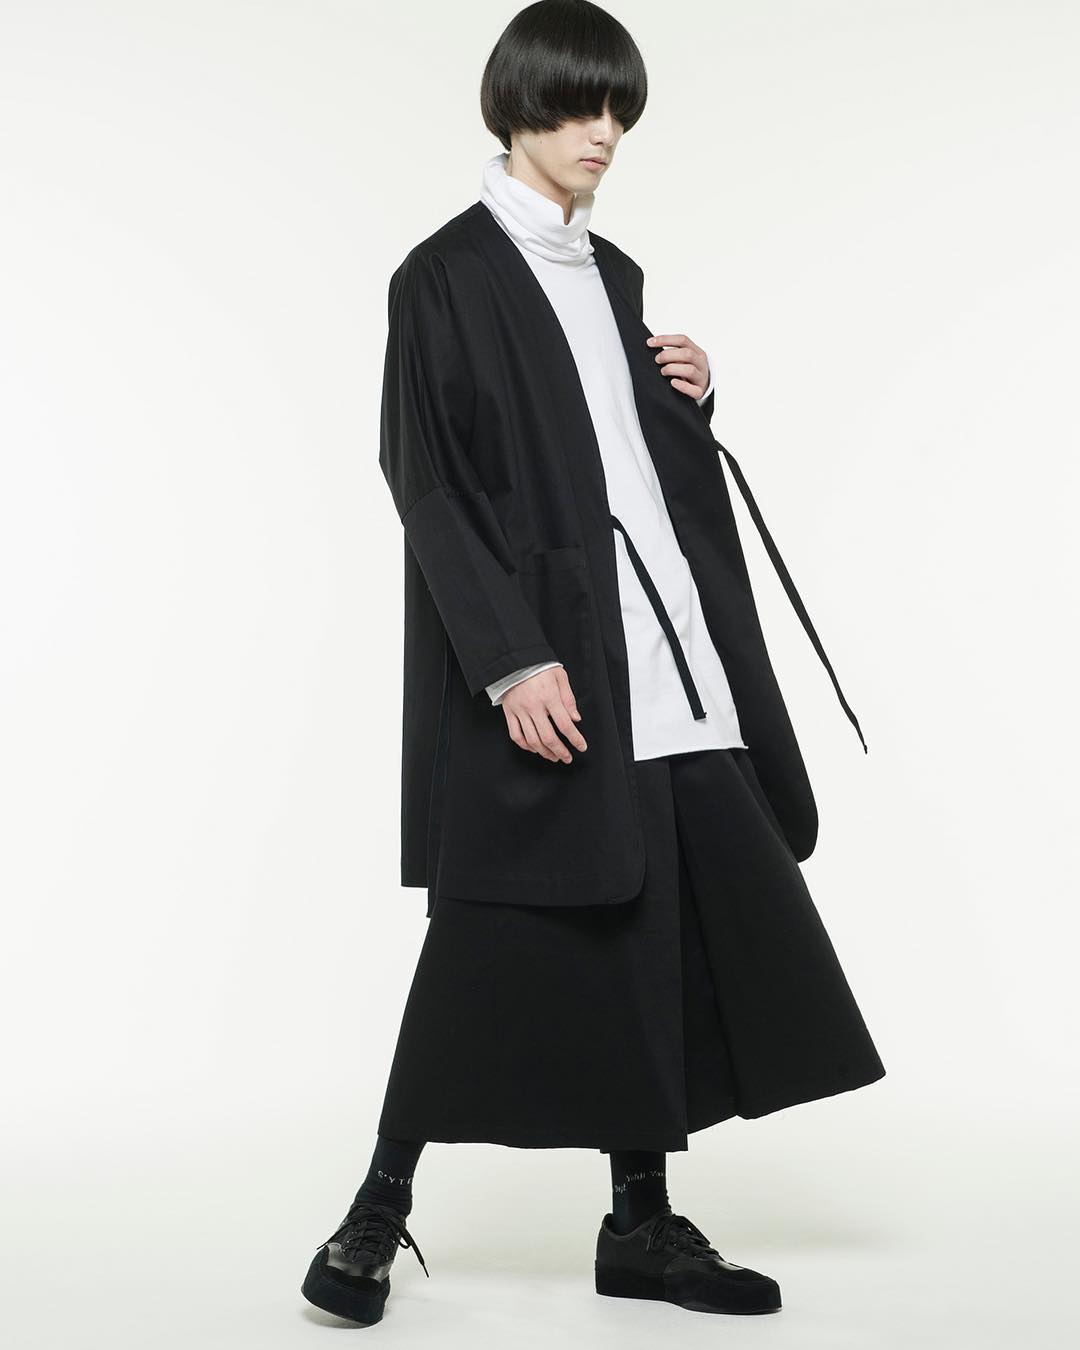 S'YTE presents a collection of oversized, unisex garments — eye_C